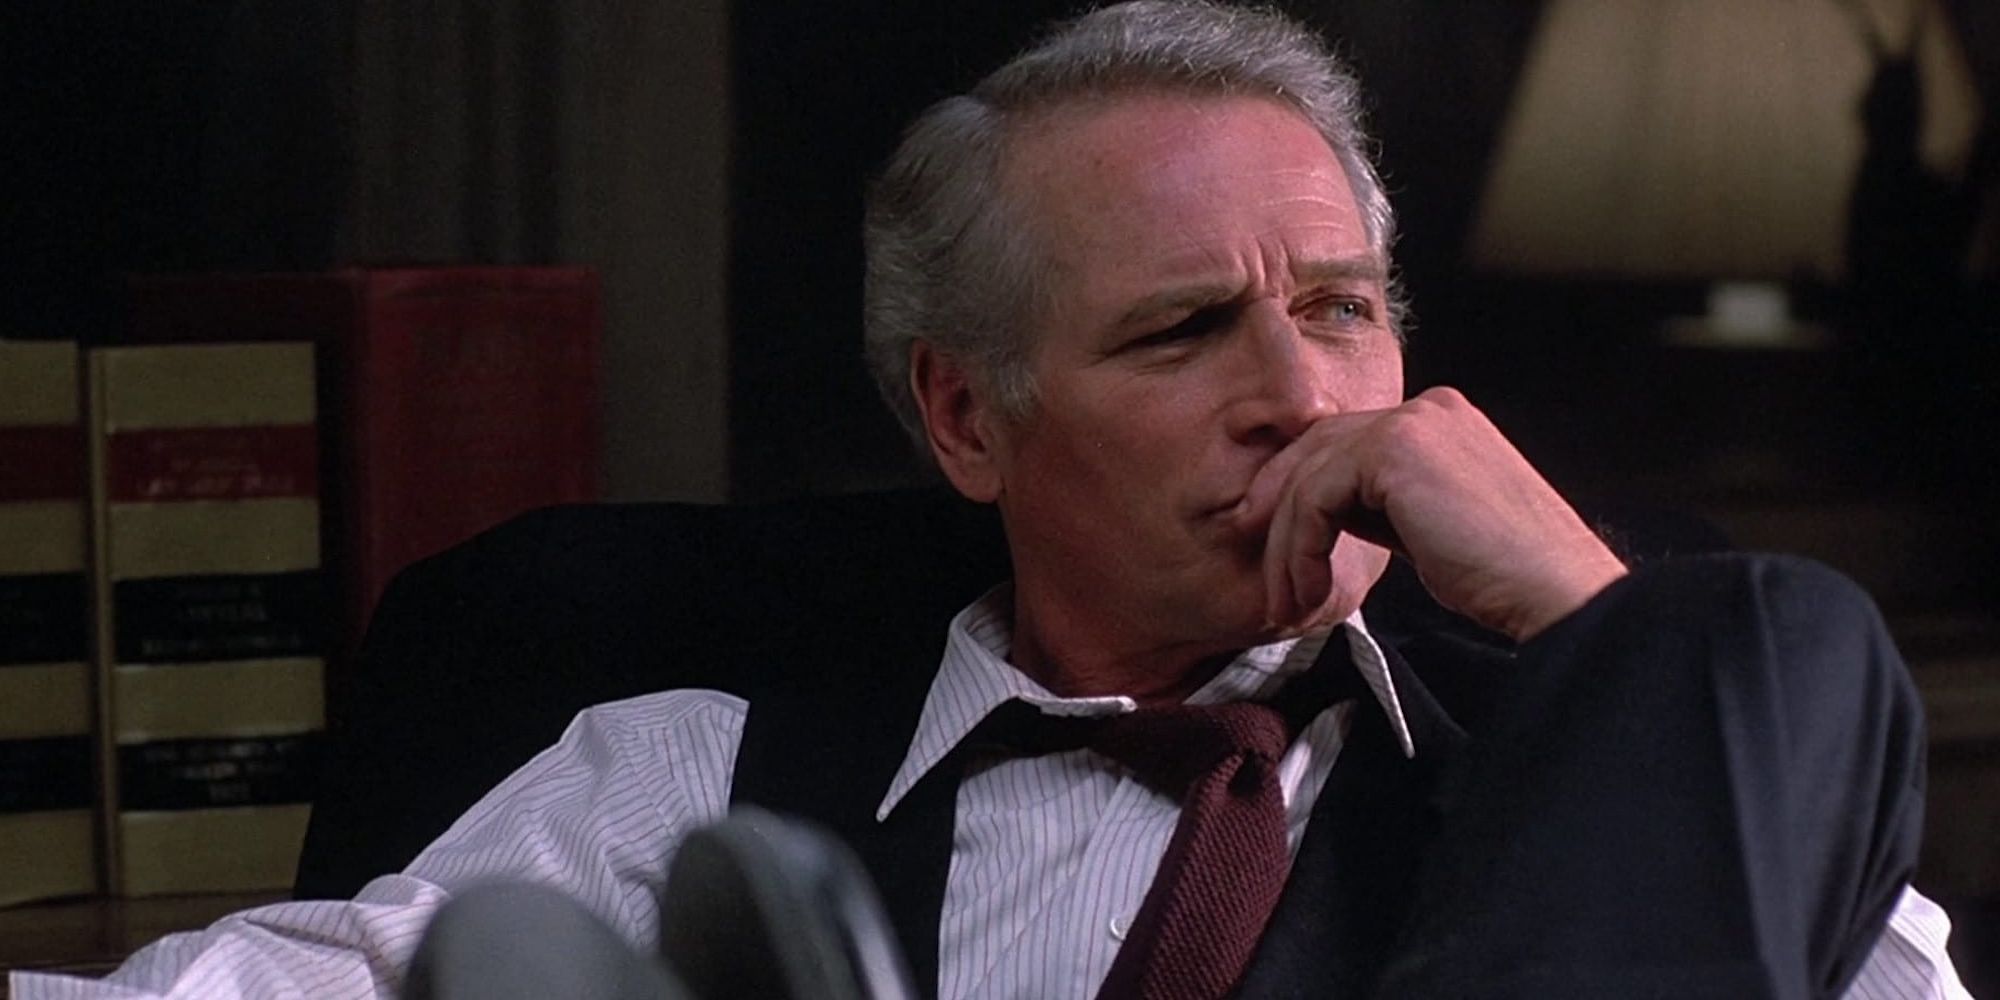 Paul Newman as Frank Galvin sitting with his feet up on his desk and his left hand on his lips in the film The Verdict.